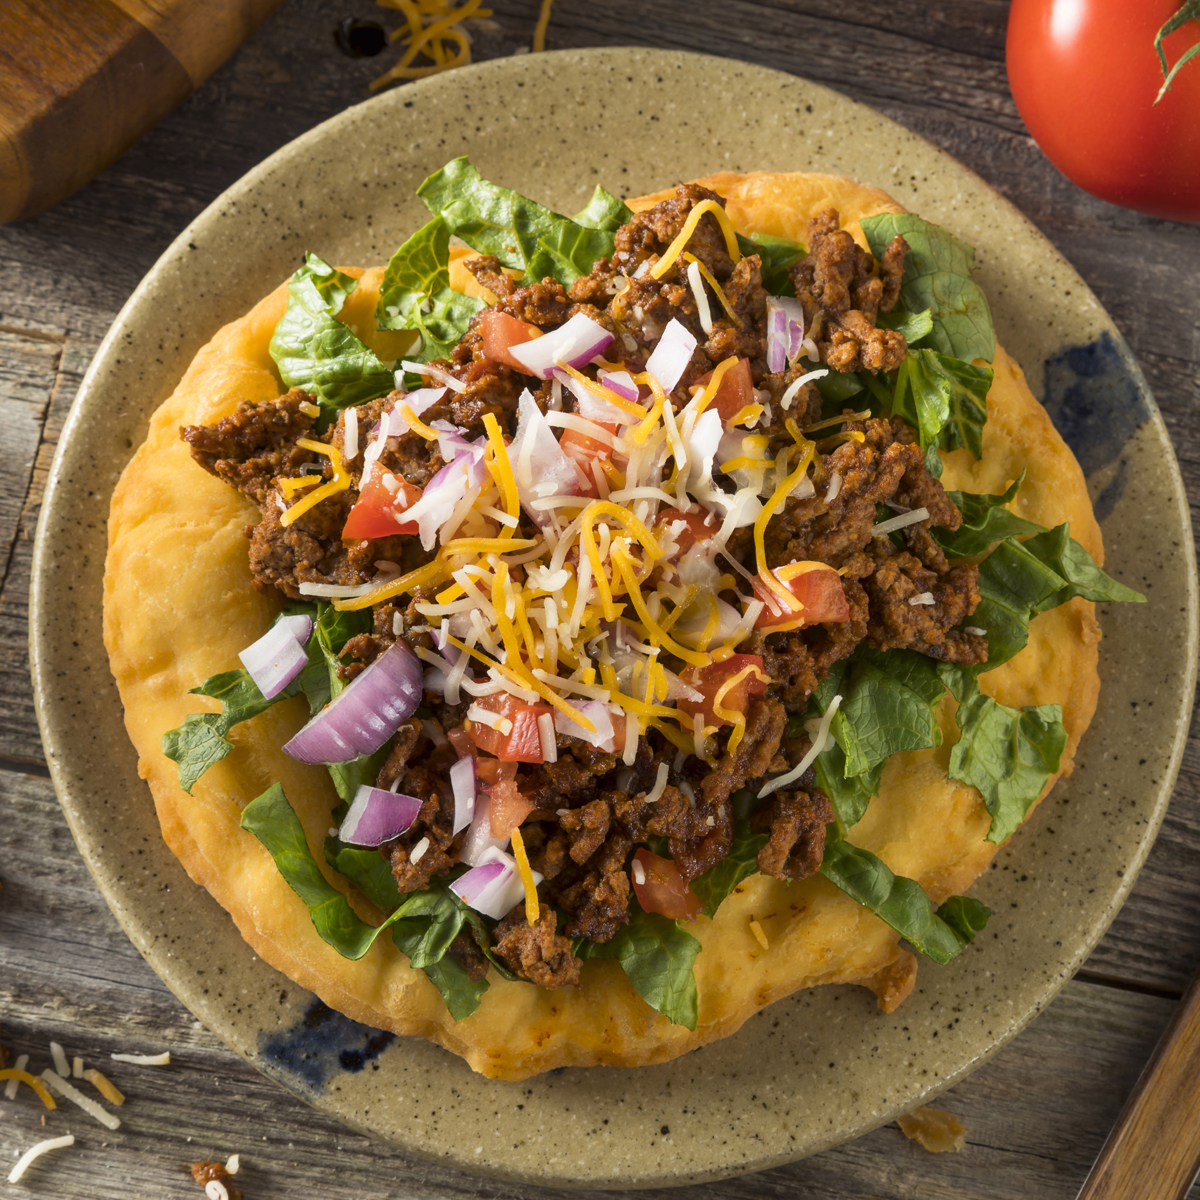 This easy Navajo Fry Bread Recipe makes a delicious fry bread that can be used to make Navajo Tacos, also called Indian Tacos. We like to make the tacos, but sometimes the kids just like to eat the fry bread with honey. Either way they are delicious!